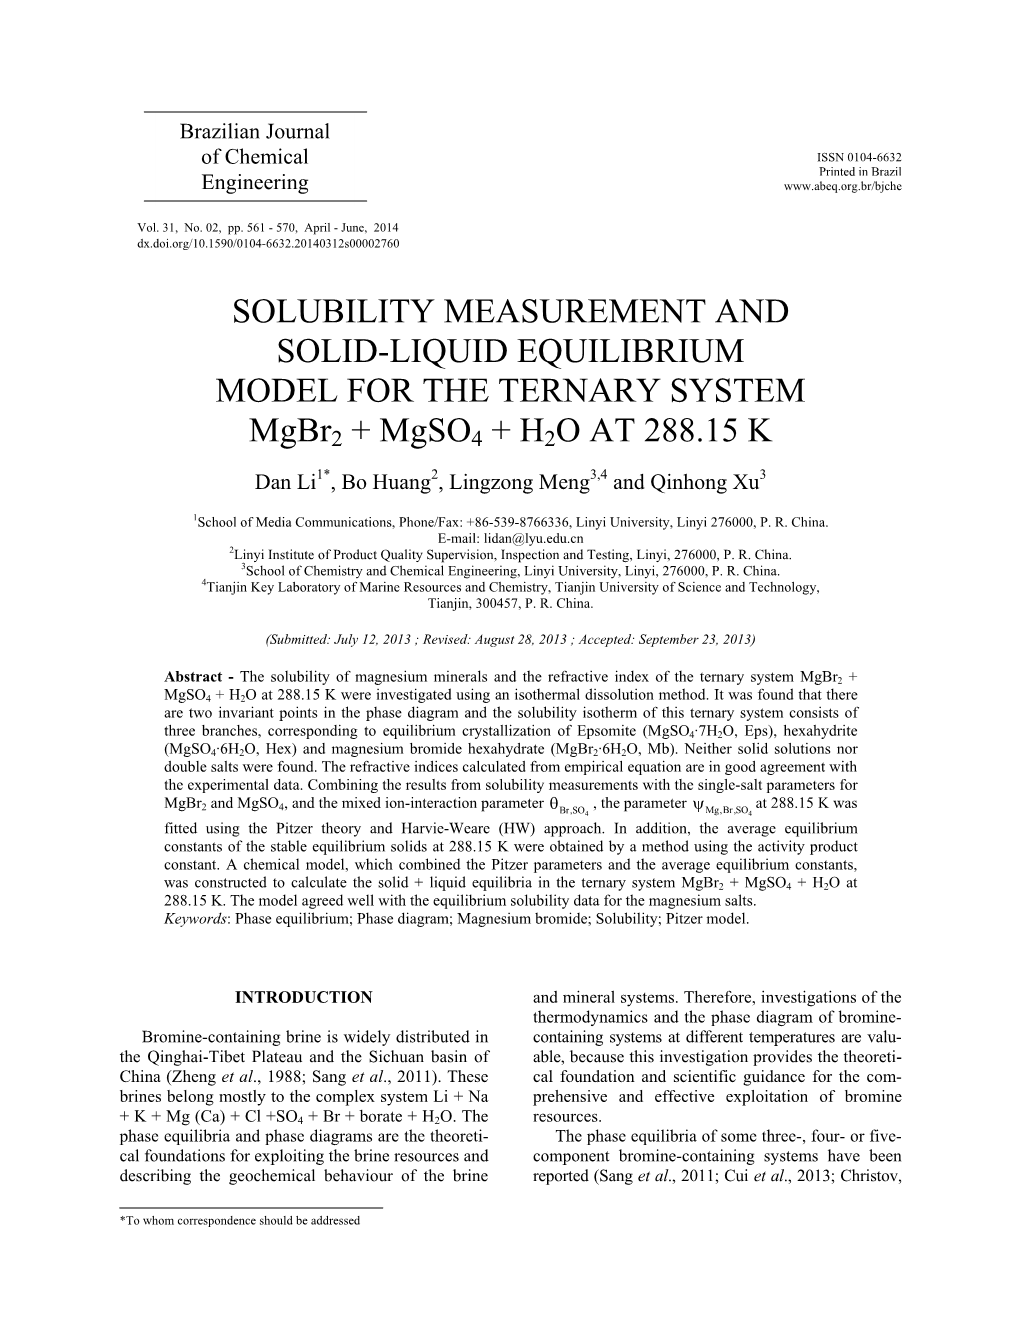 SOLUBILITY MEASUREMENT and SOLID-LIQUID EQUILIBRIUM MODEL for the TERNARY SYSTEM Mgbr2 + Mgso4 + H2O at 288.15 K